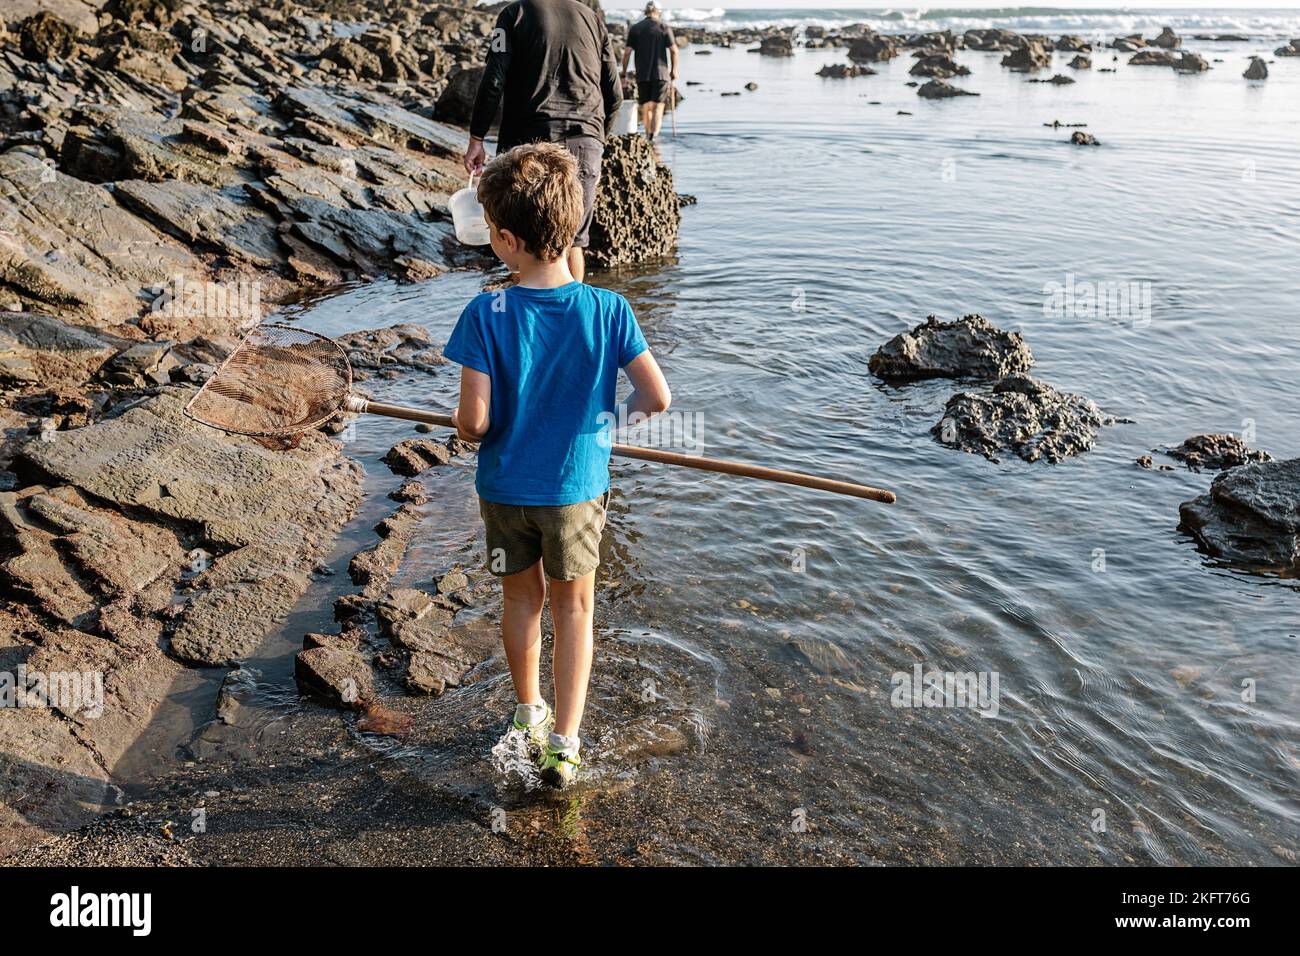 Full body of little boy holding net scoop for fishing in shallow water while standing on coast with stones in sunlight Stock Photo